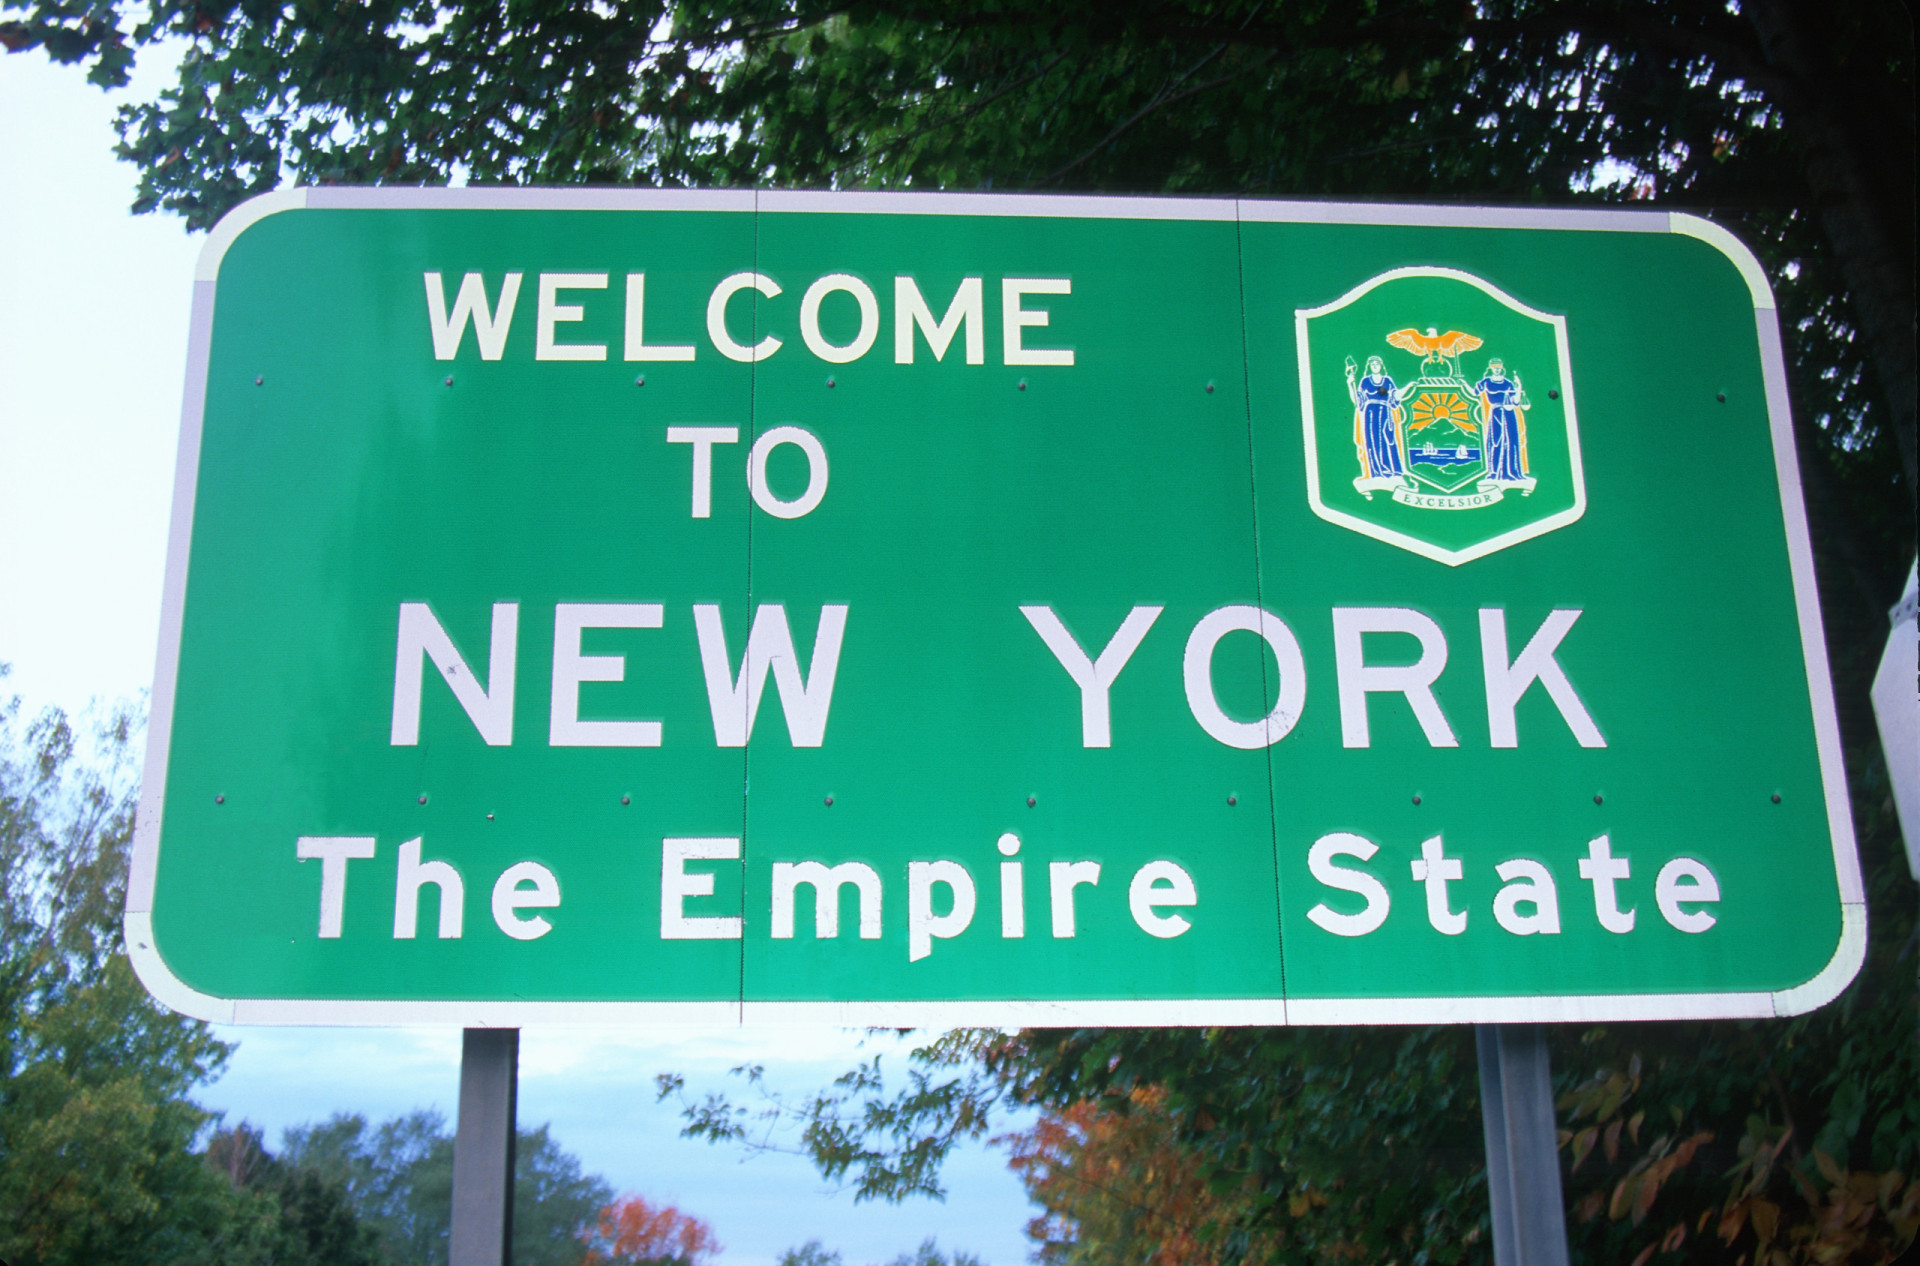 <p>The nickname "The Empire State" dates back all the way to 1785. George Washington described New York "the Seat of the Empire" in a letter to the New York Common Council.</p>